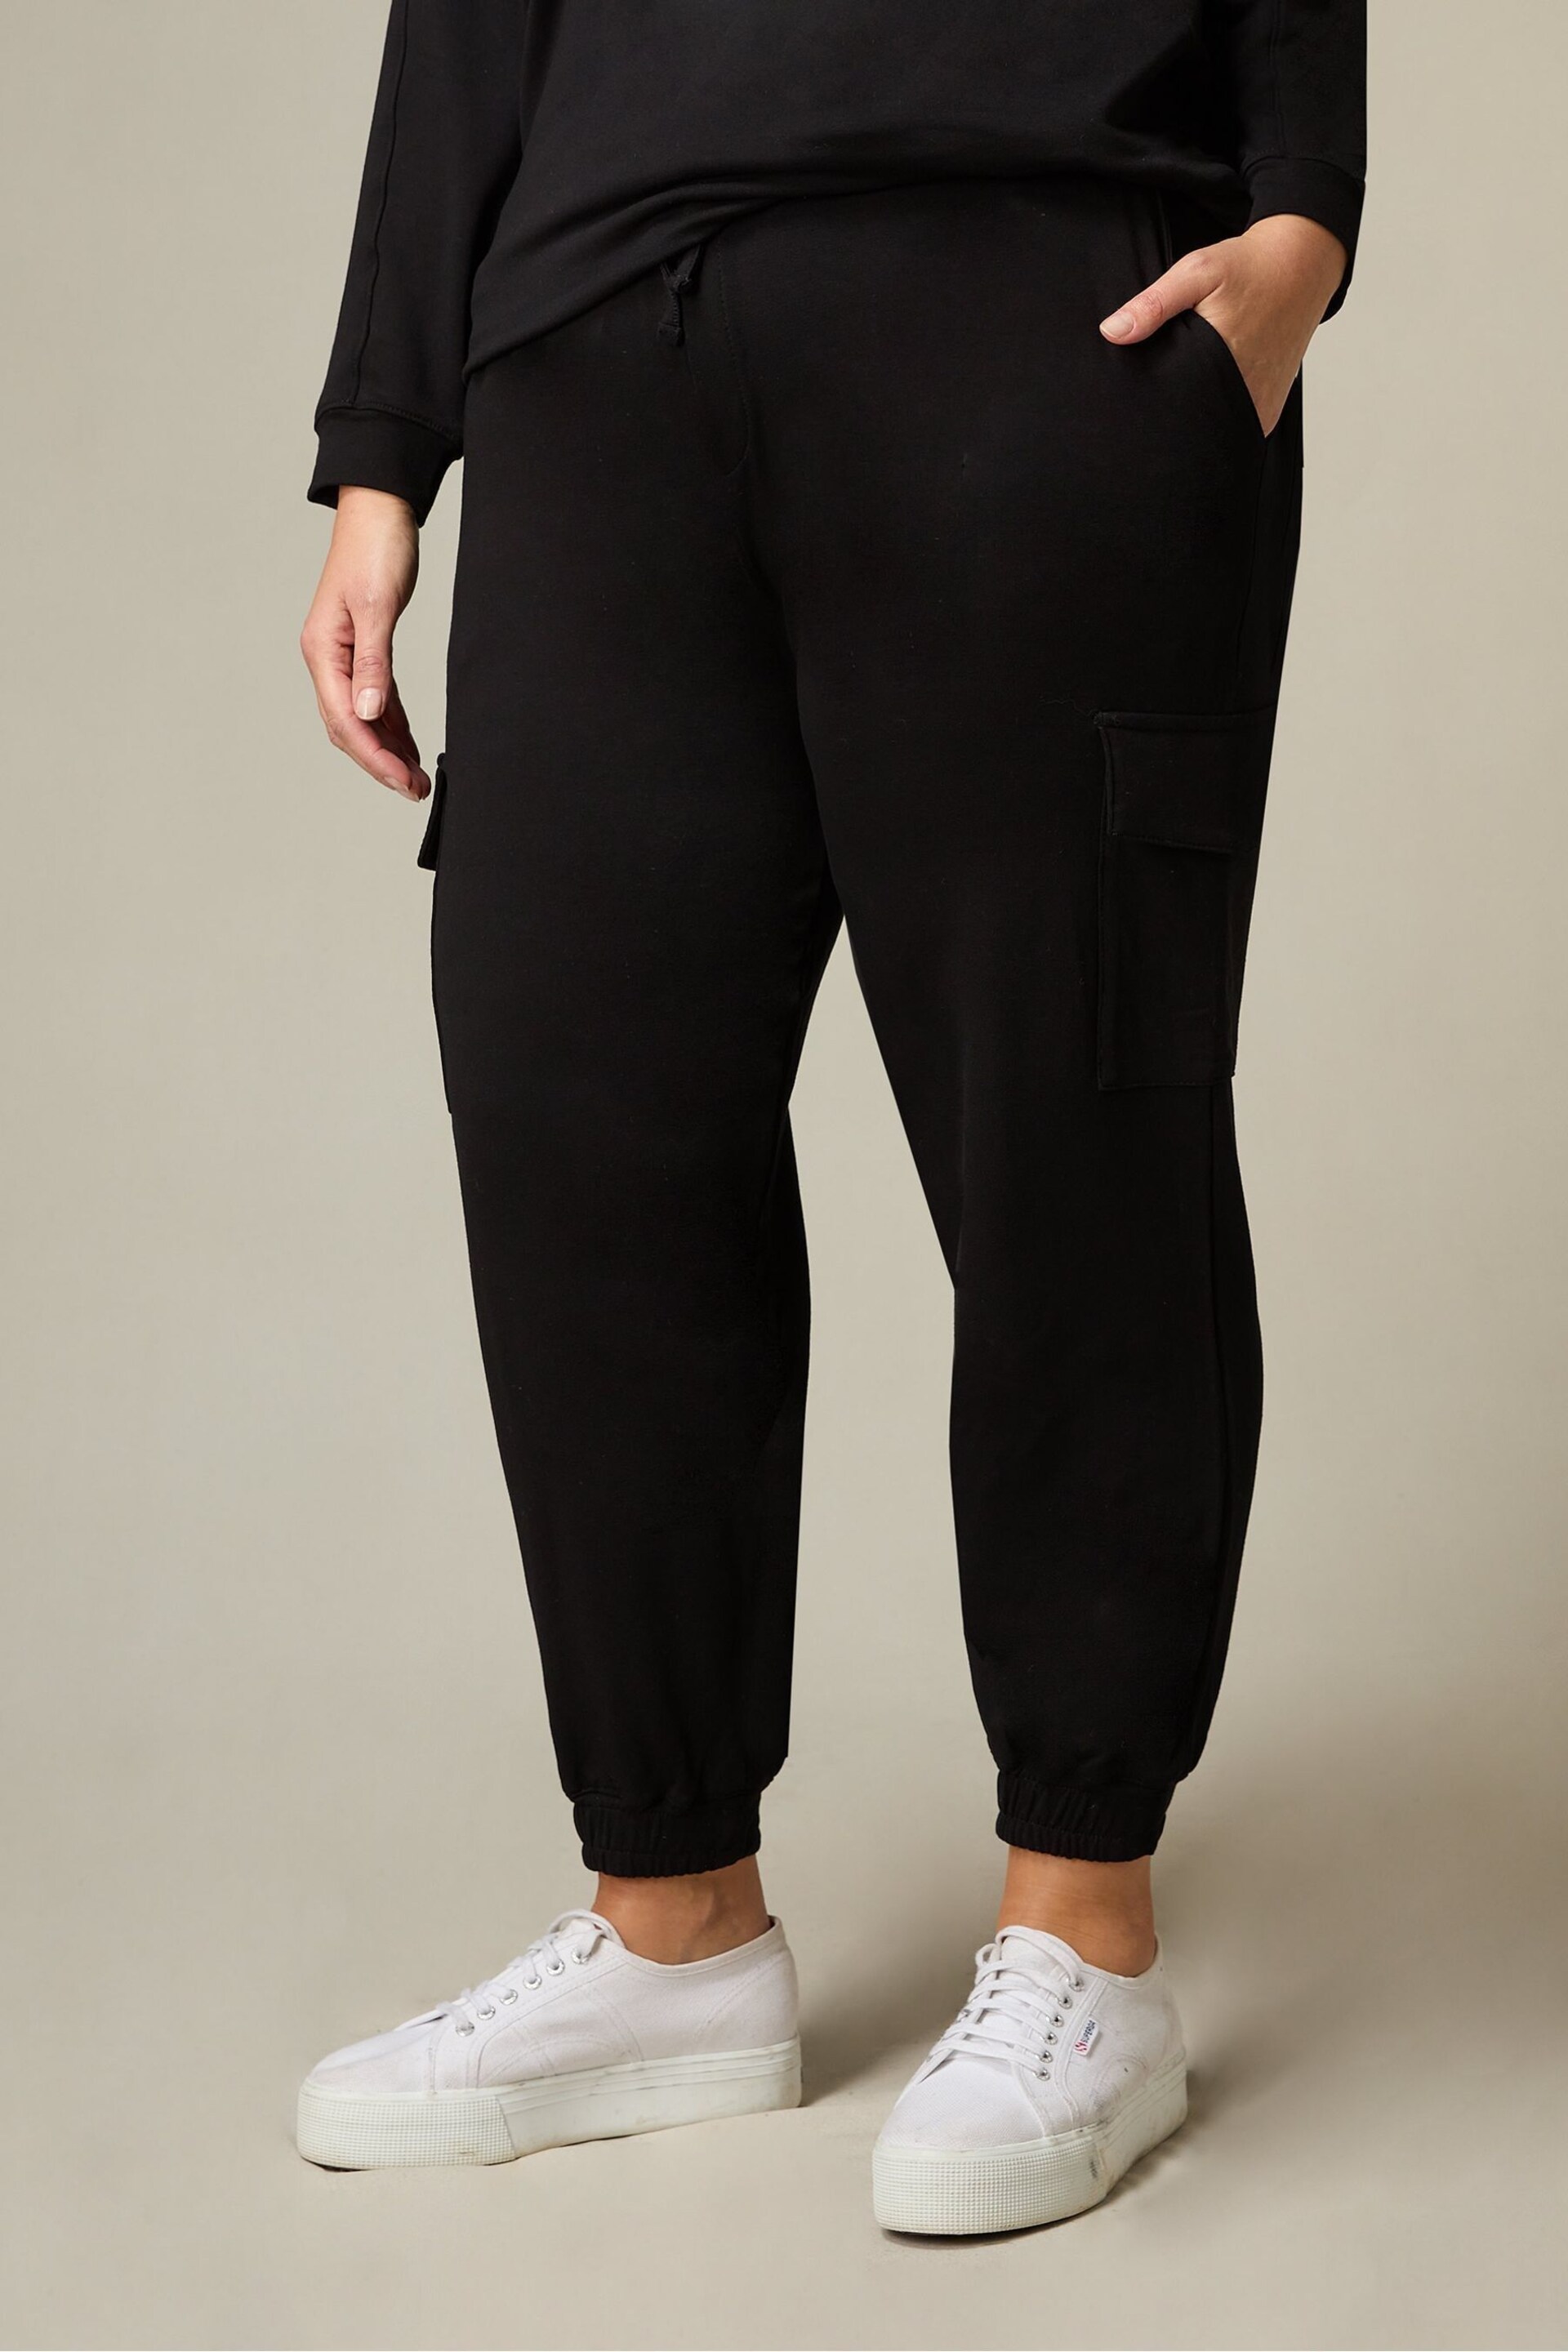 Live Unlimited Curve Jersey Cargo Black Trousers - Image 1 of 4